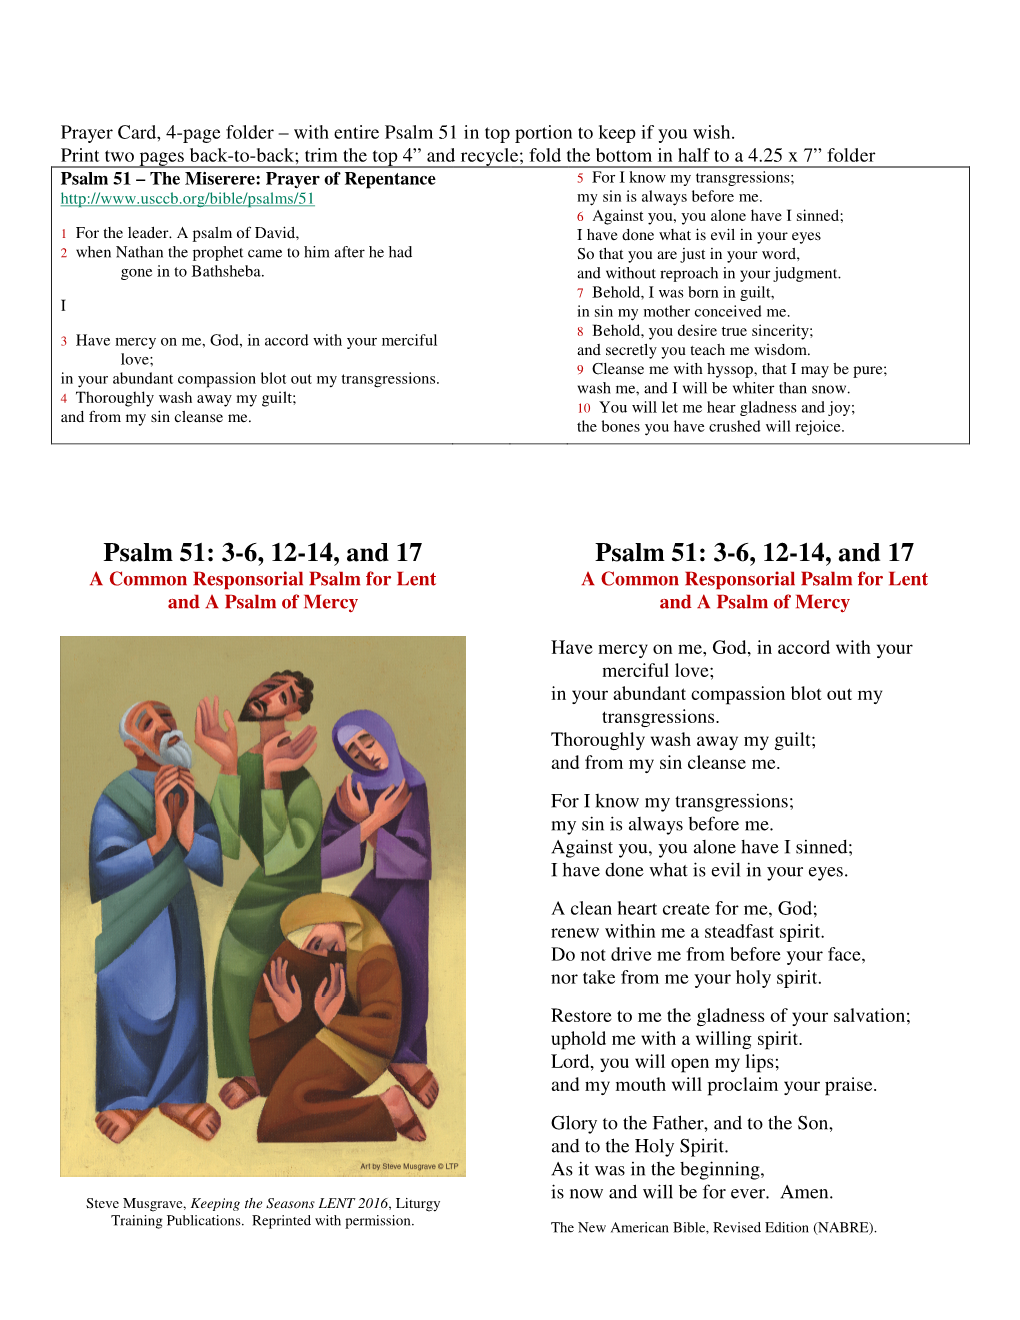 3-6, 12-14, and 17 Psalm 51: 3-6, 12-14, and 17 a Common Responsorial Psalm for Lent a Common Responsorial Psalm for Lent and a Psalm of Mercy and a Psalm of Mercy